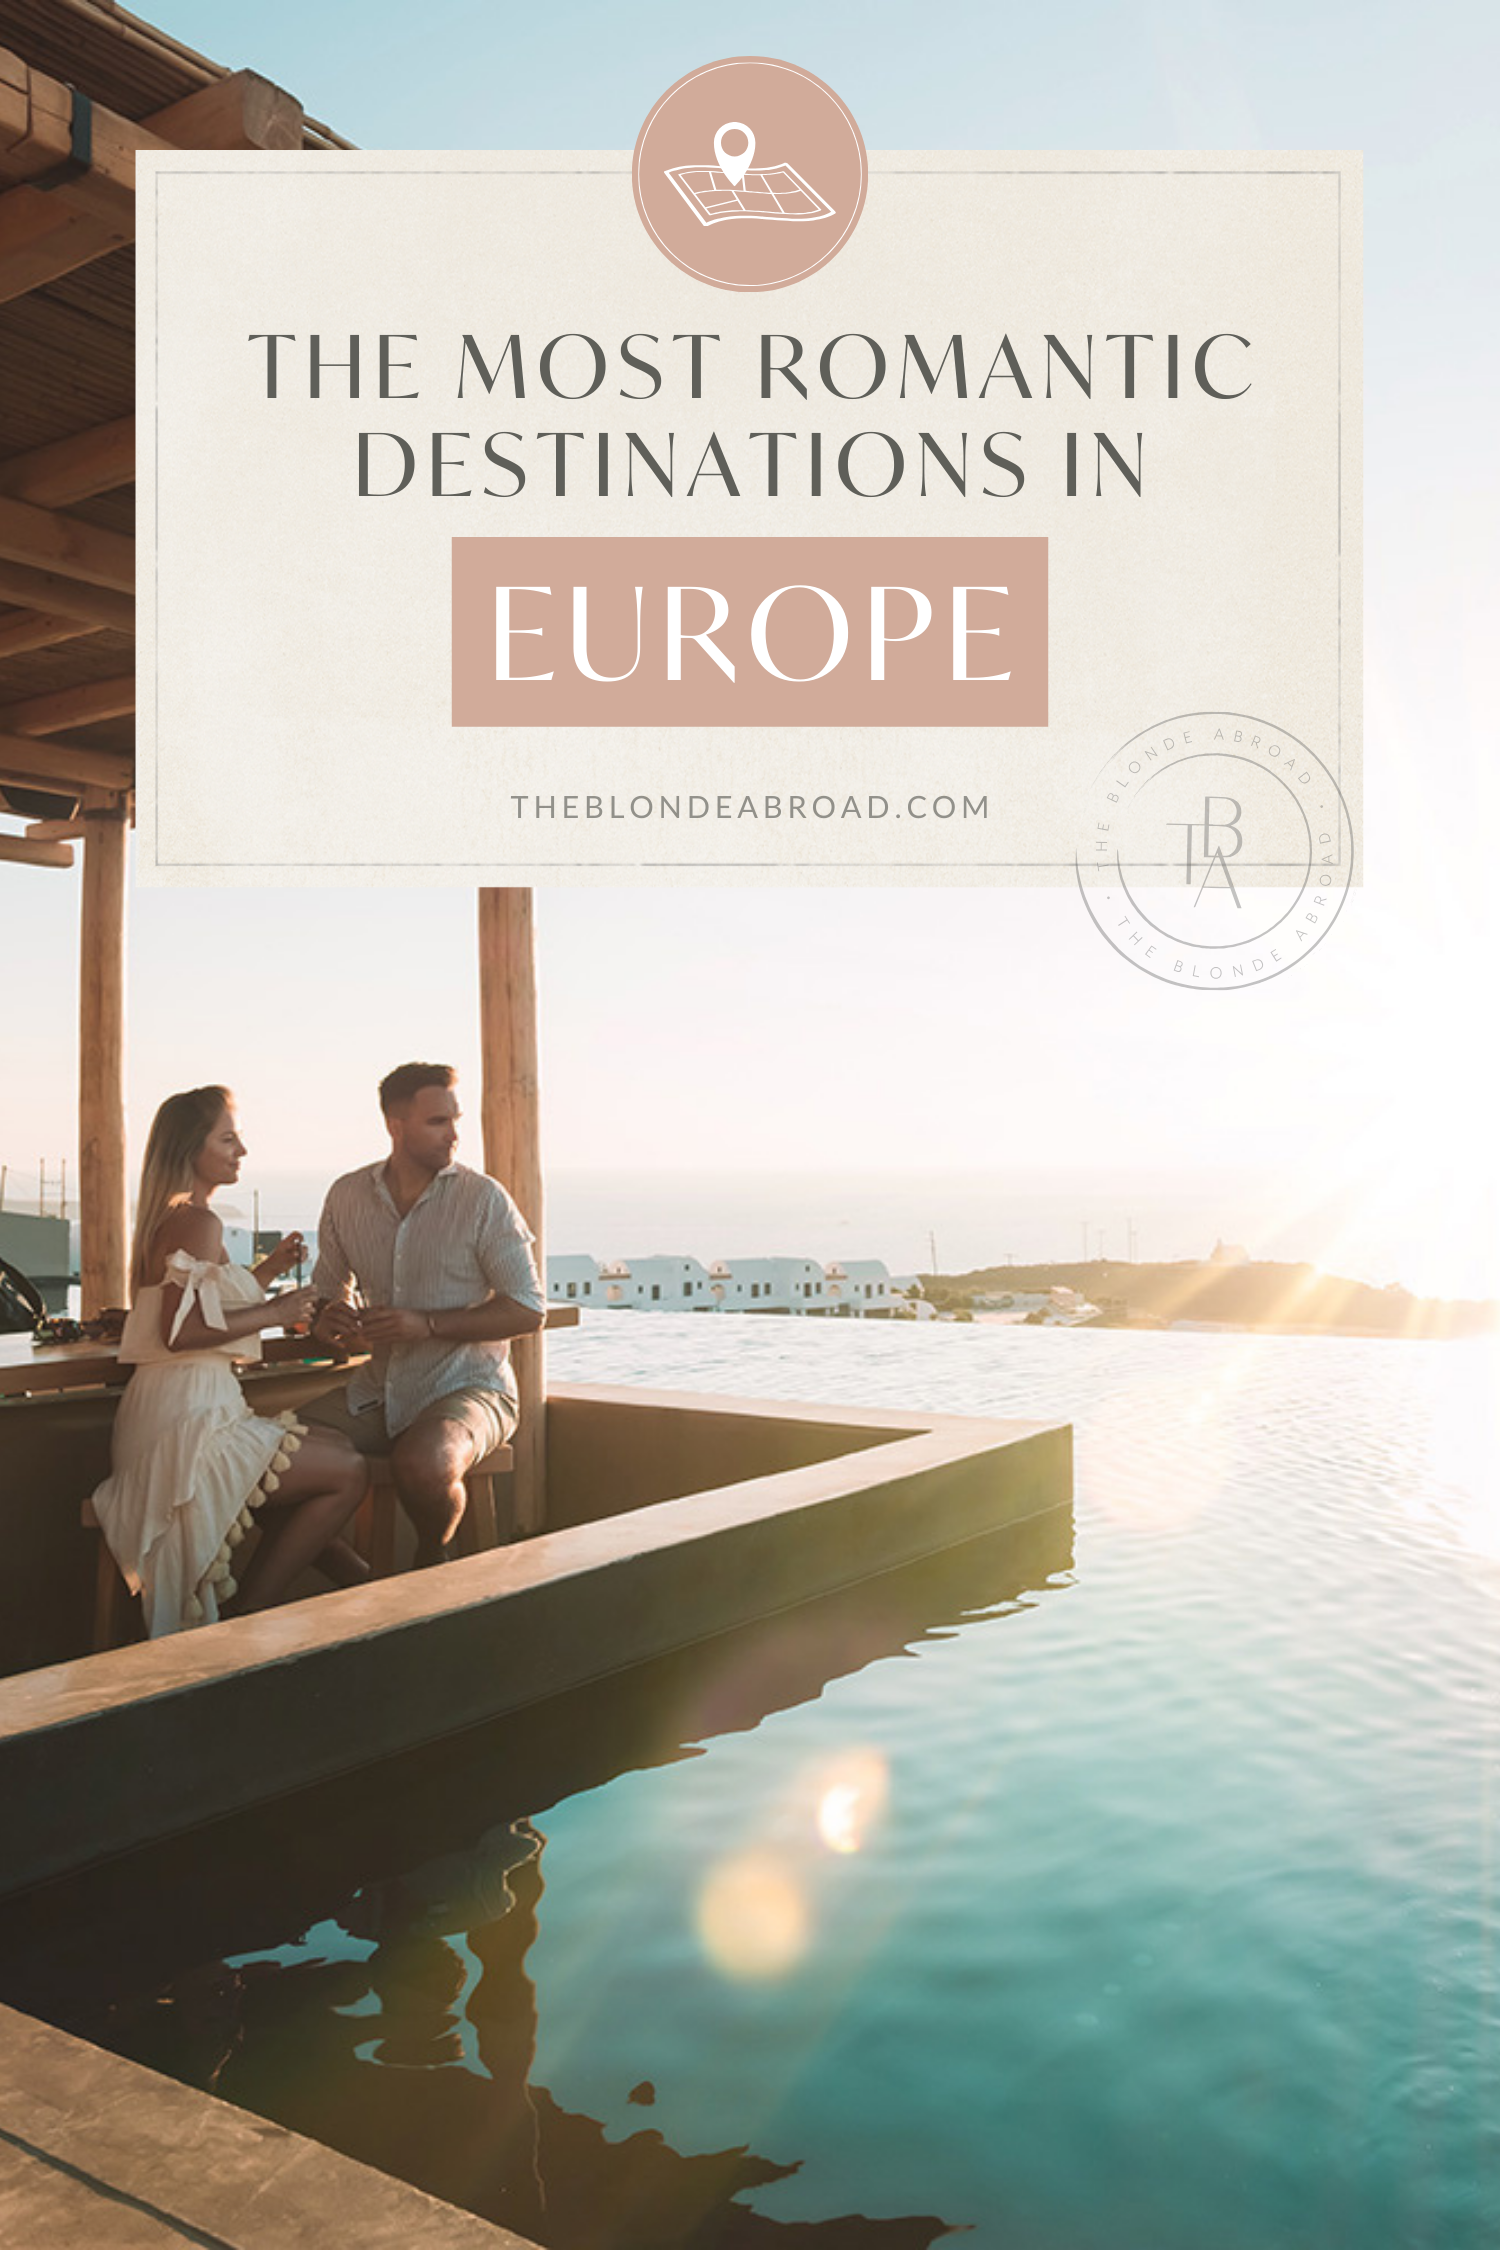 The Most Romantic Destinations in Europe 